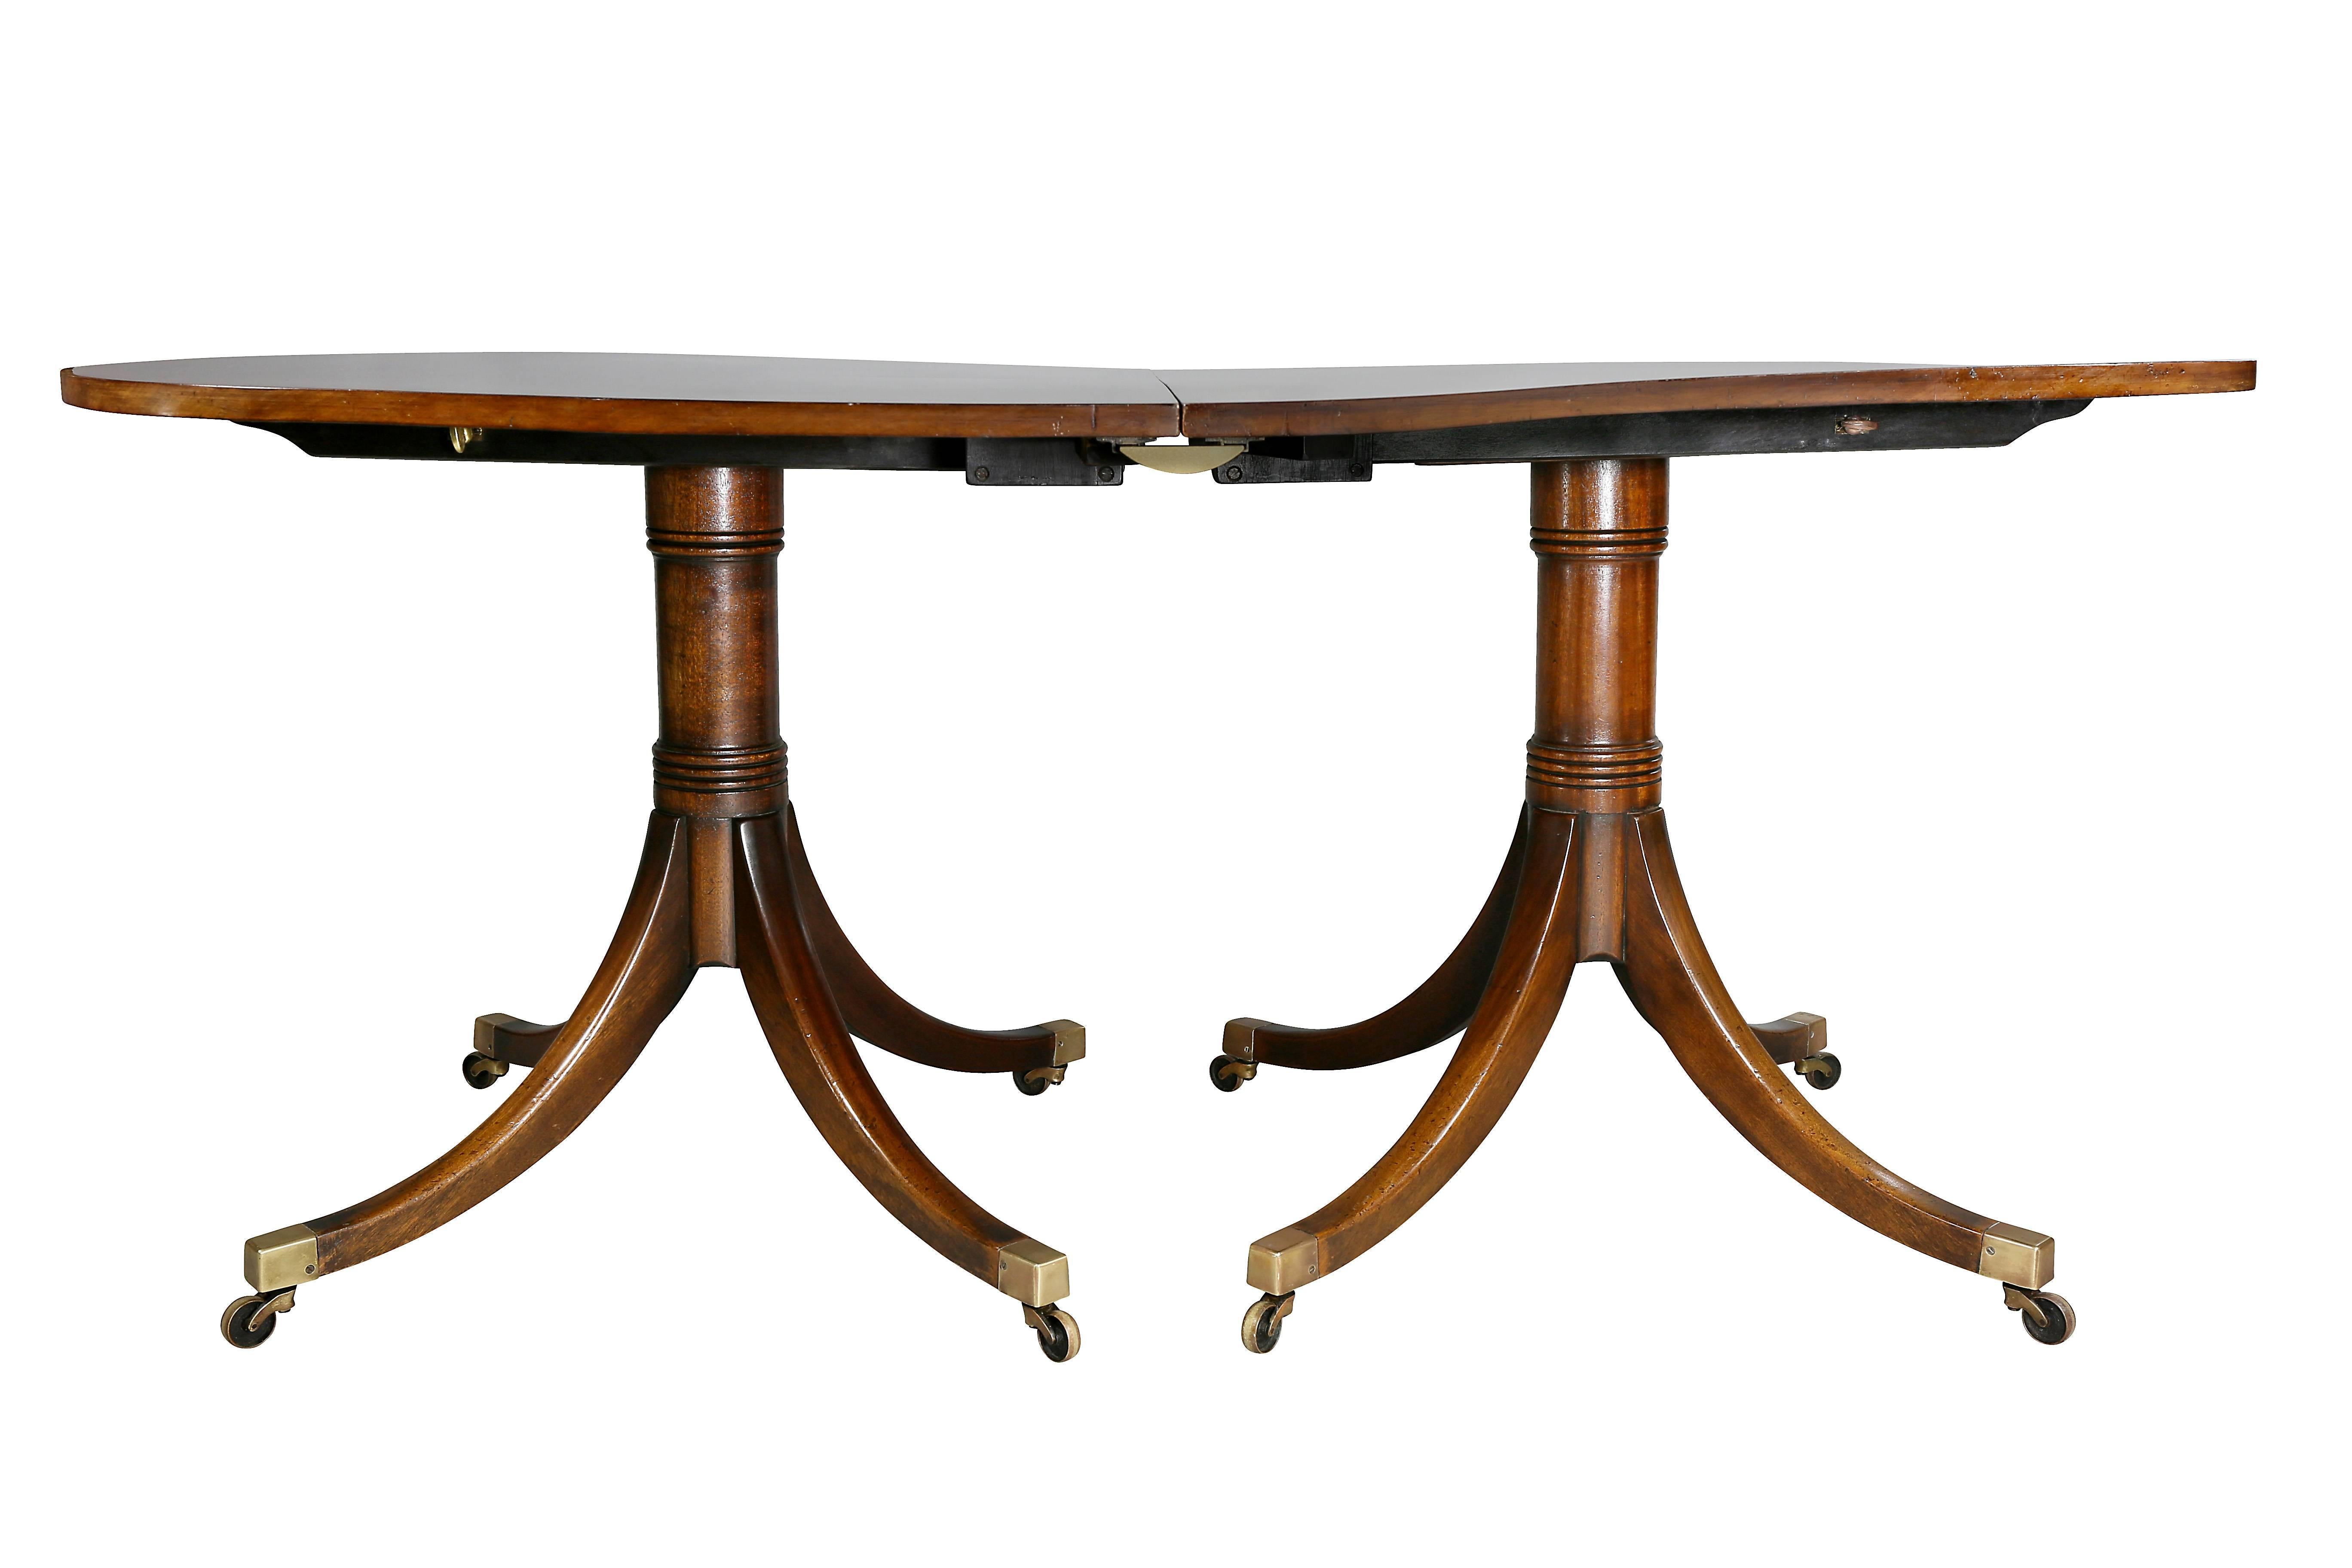 Rectangular top with a rosewood cross band, with two pedestals each with four saber legs ending on casters, with two leaves.